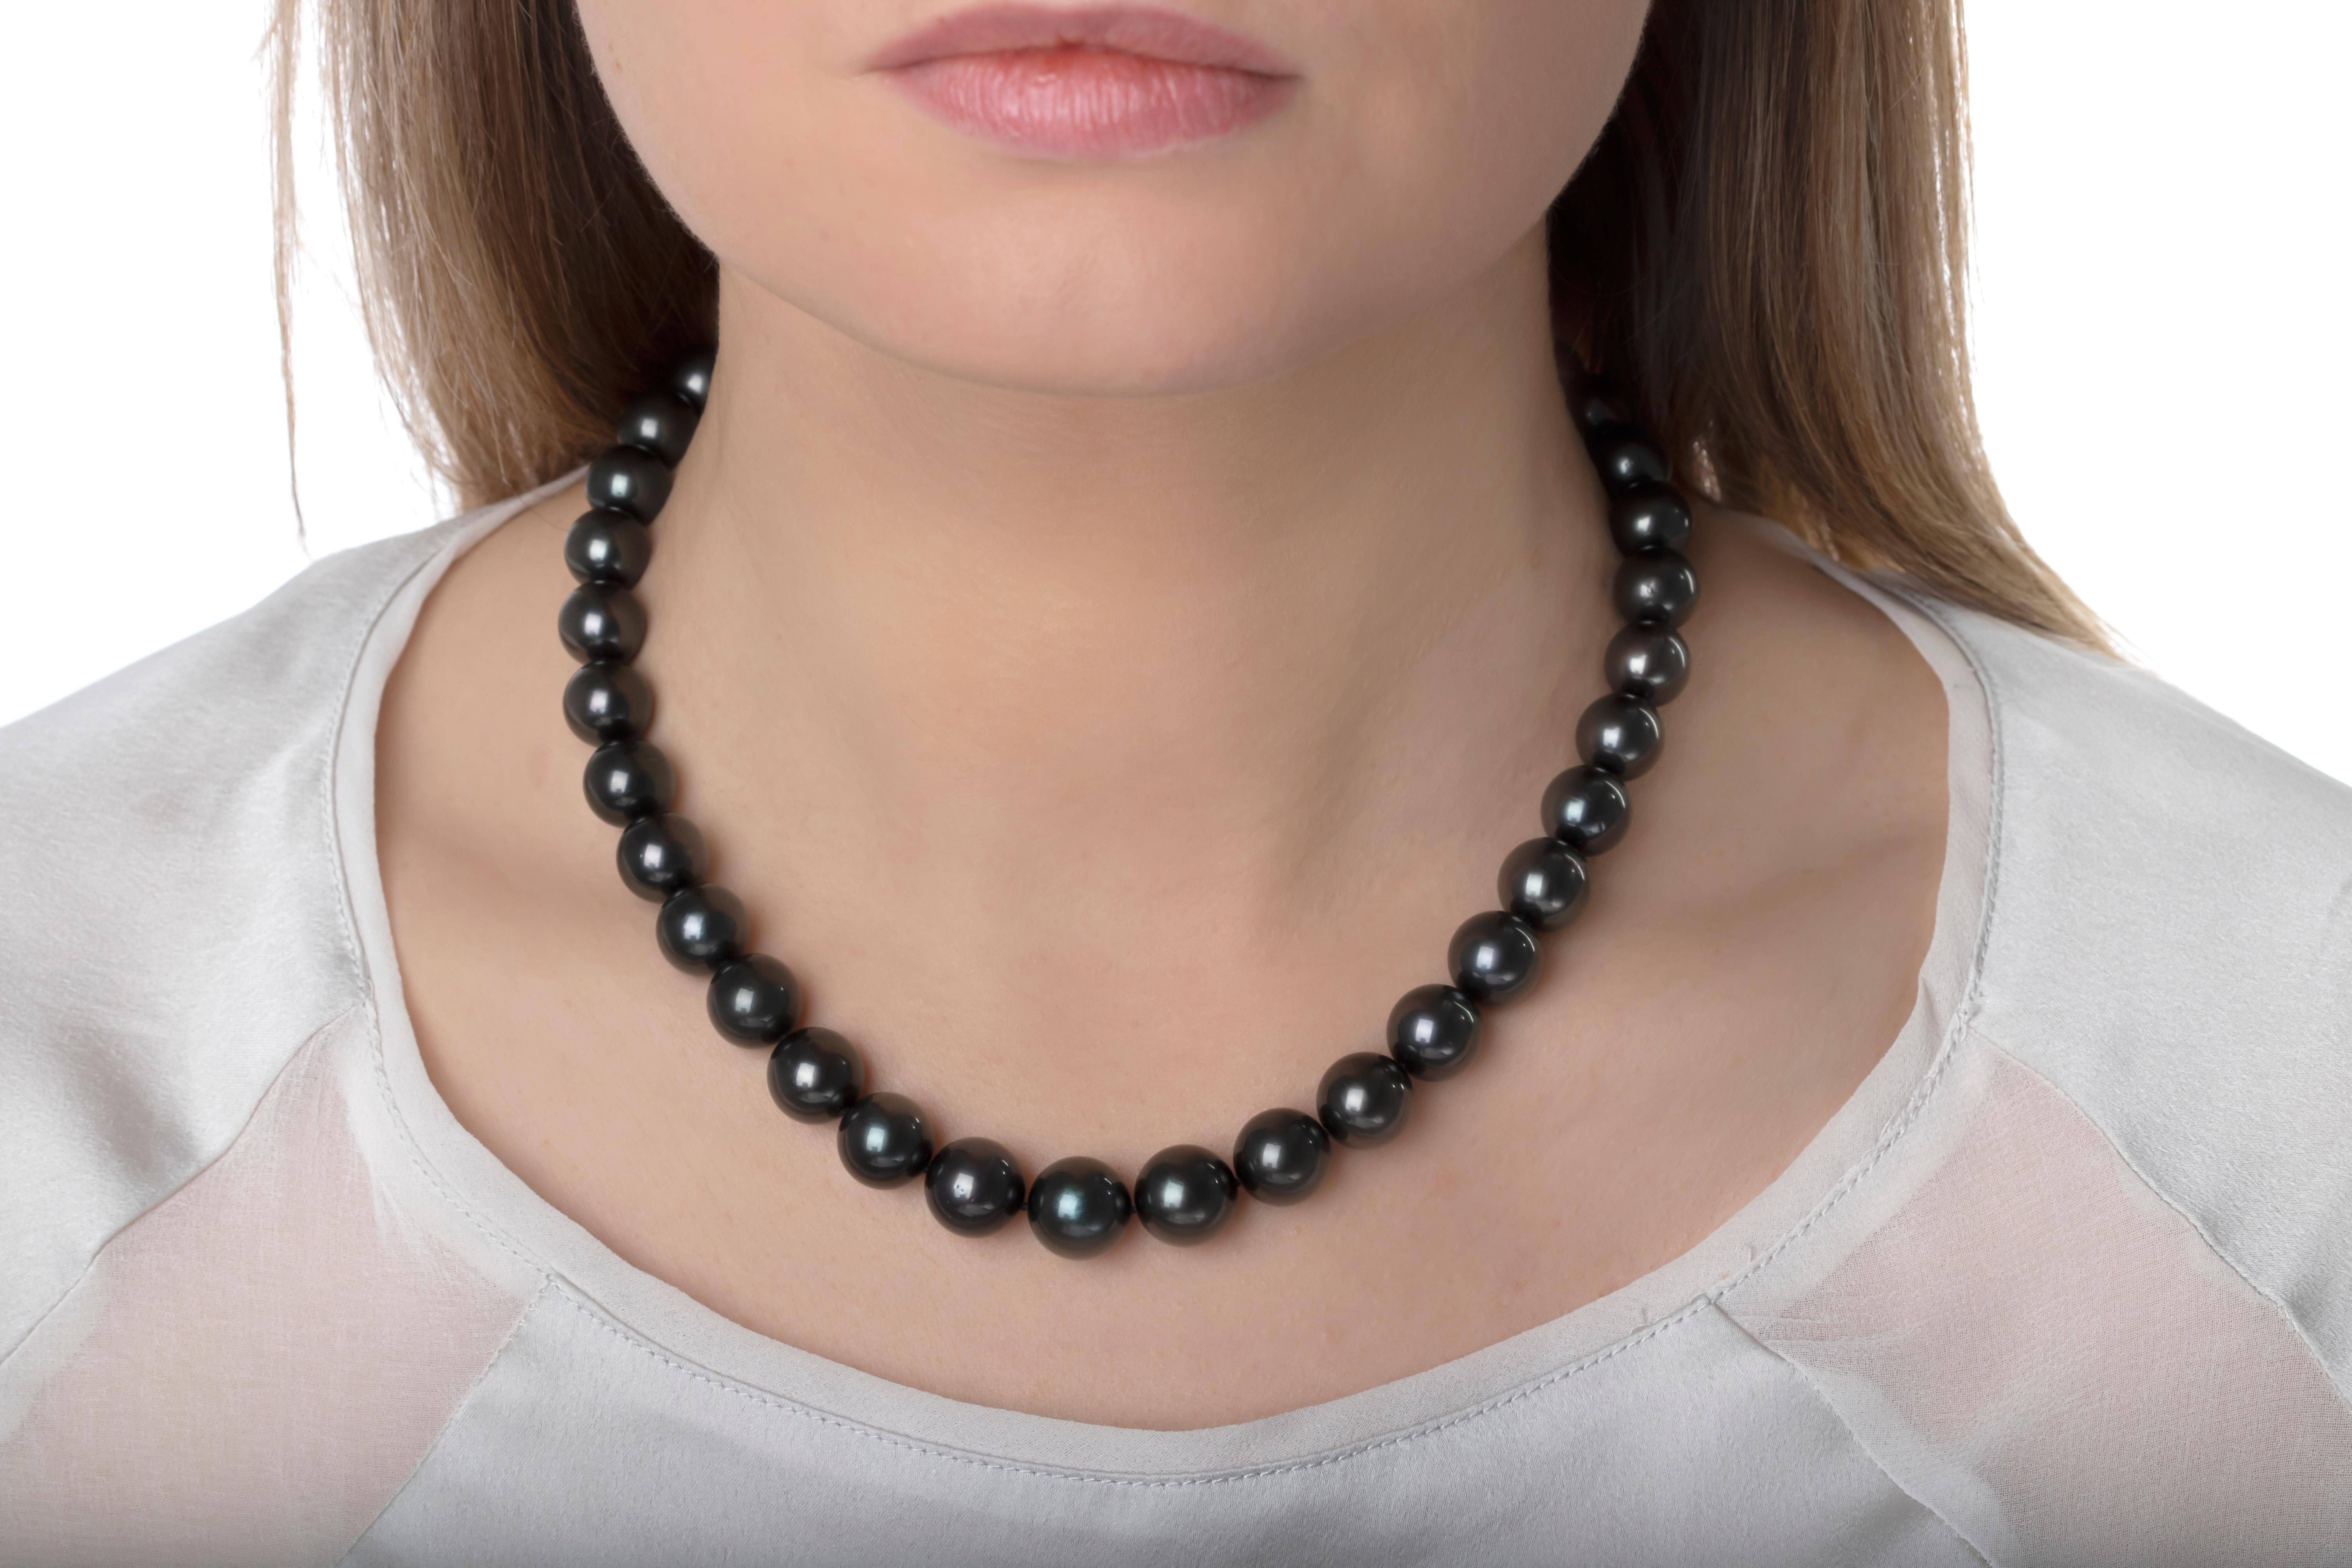 This elegant necklace by Yoko London features spectacular Tahitian pearls which softly graduate in size from 10mm to 12.6mm, set on an 18 karat white gold clasp. This timeless necklace will add a striking touch to both daytime and evening looks. 

-